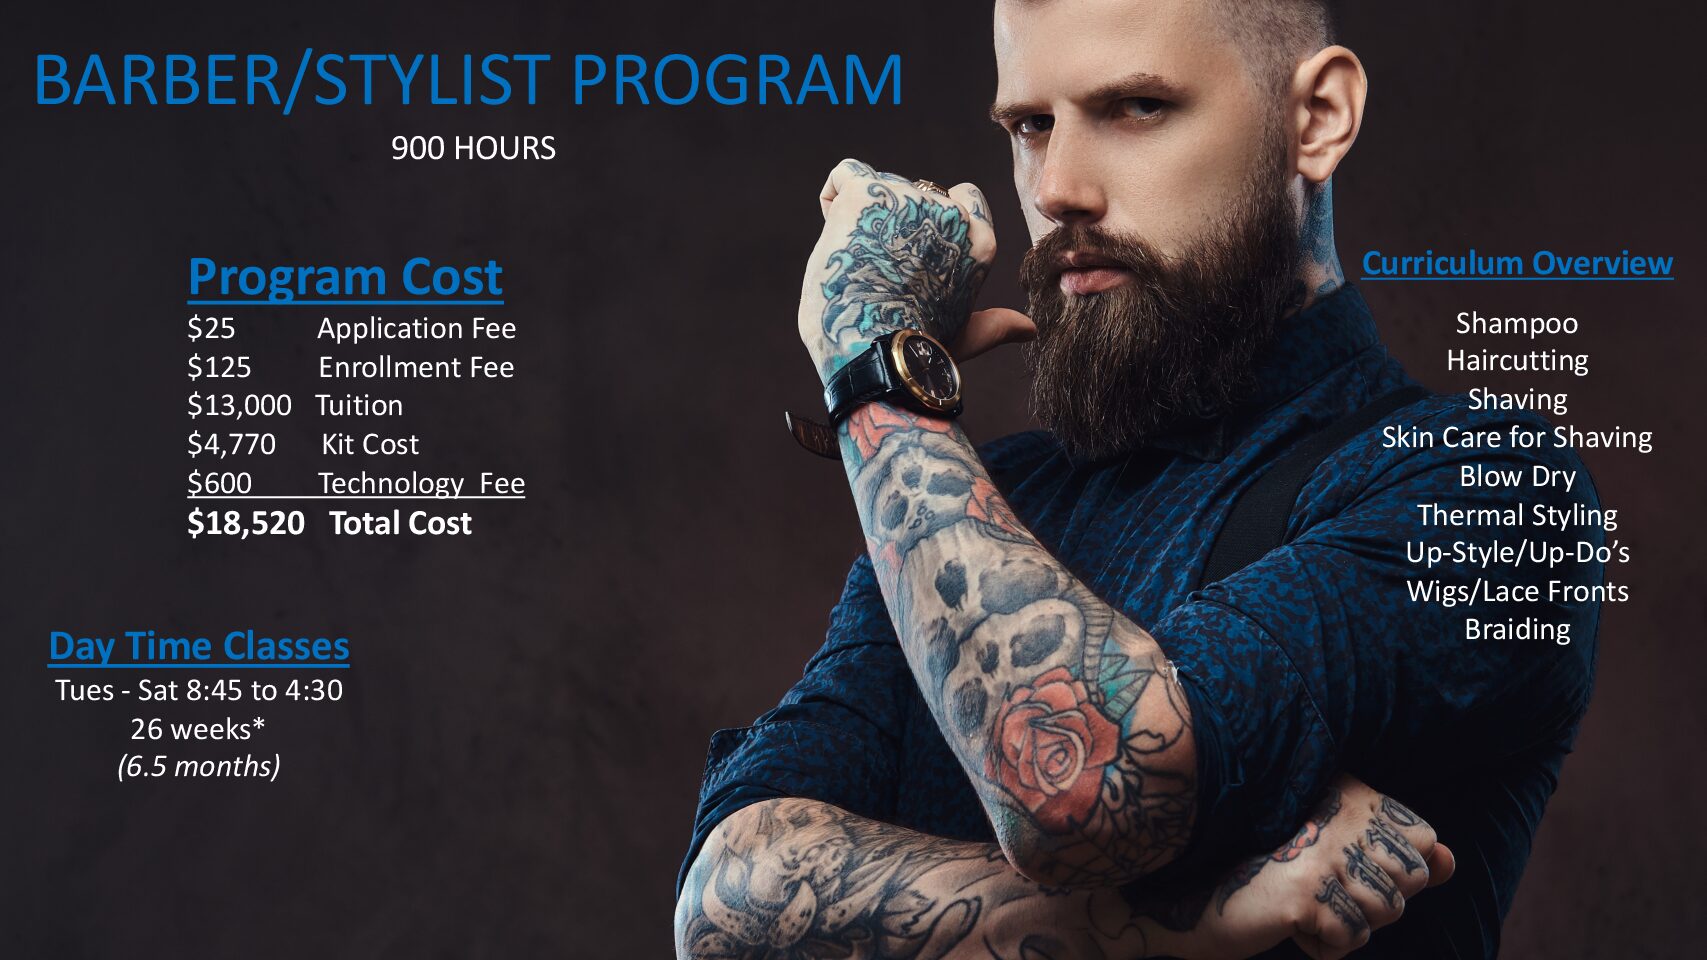 Aveda Institute Barber Schools in Maryland Program Hours and Curriculum Overview